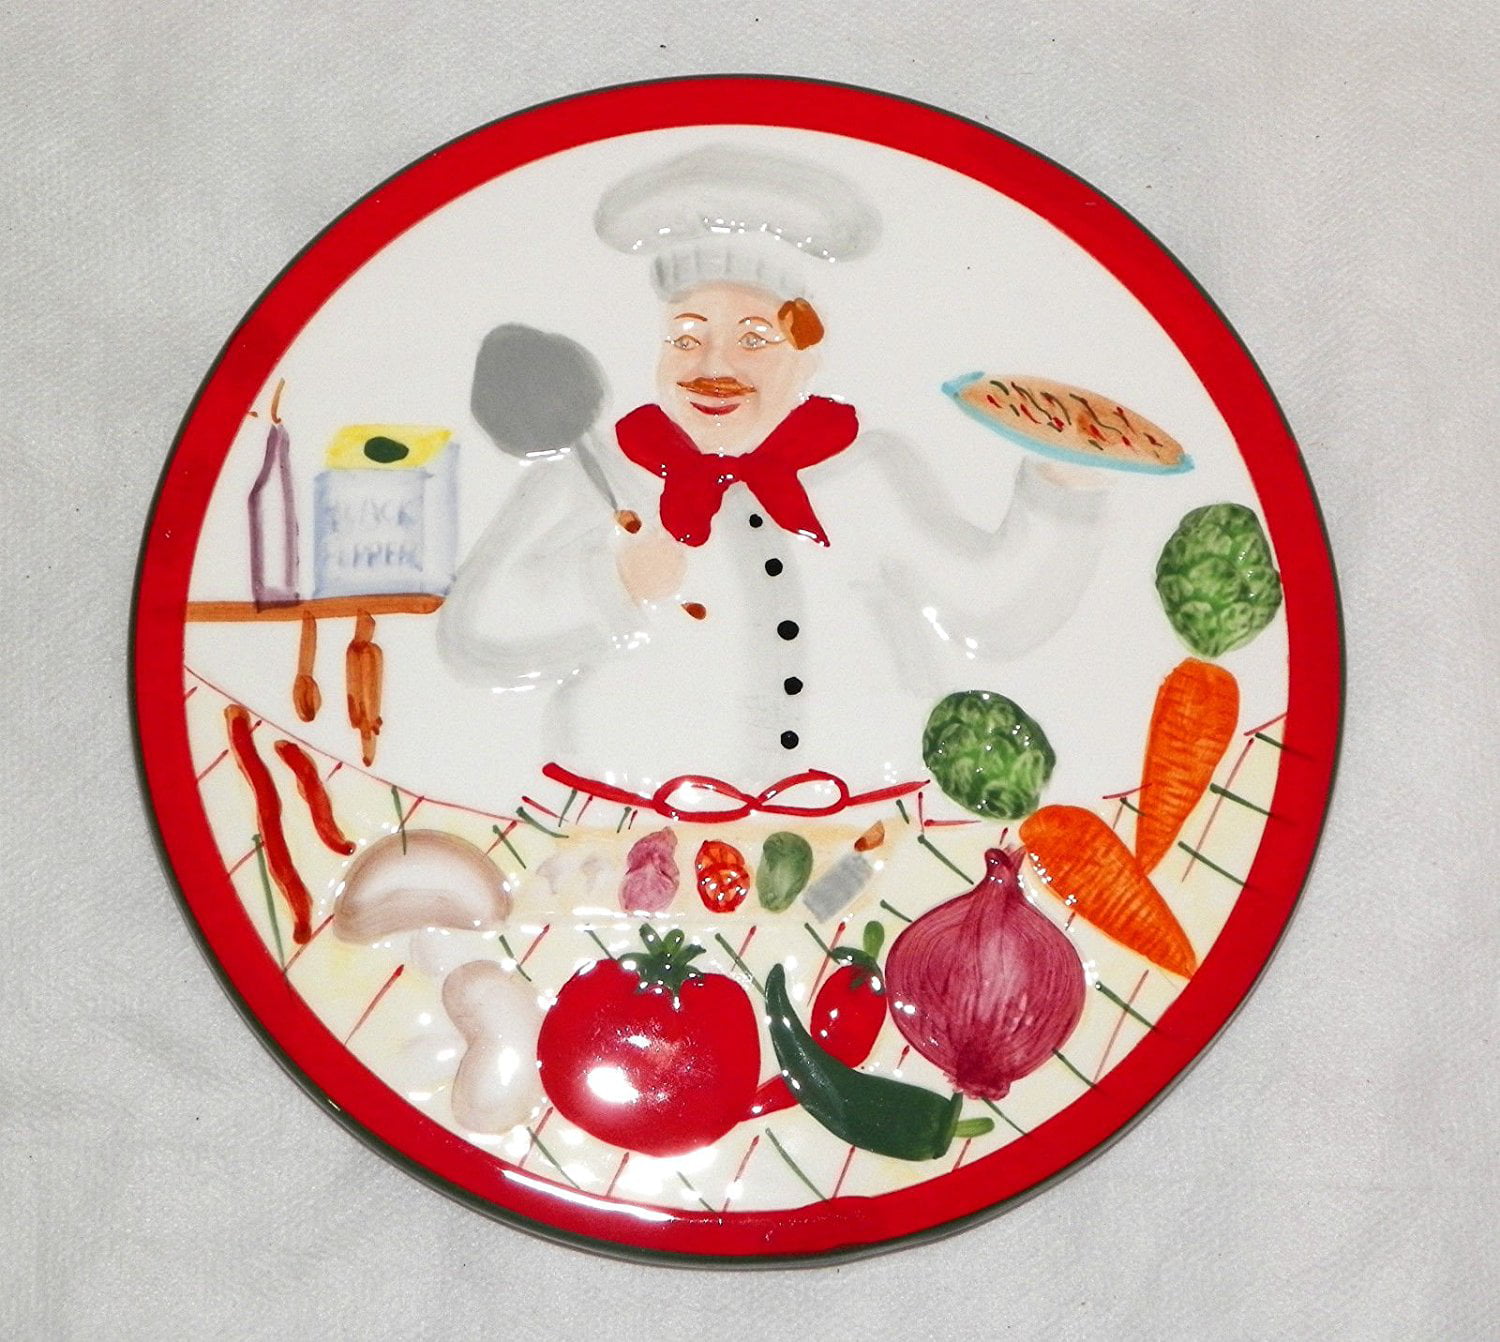 10" x 12" Plastic Wall Clock FAT CHEF WITH HOT PLATE & FRYING PAN app 